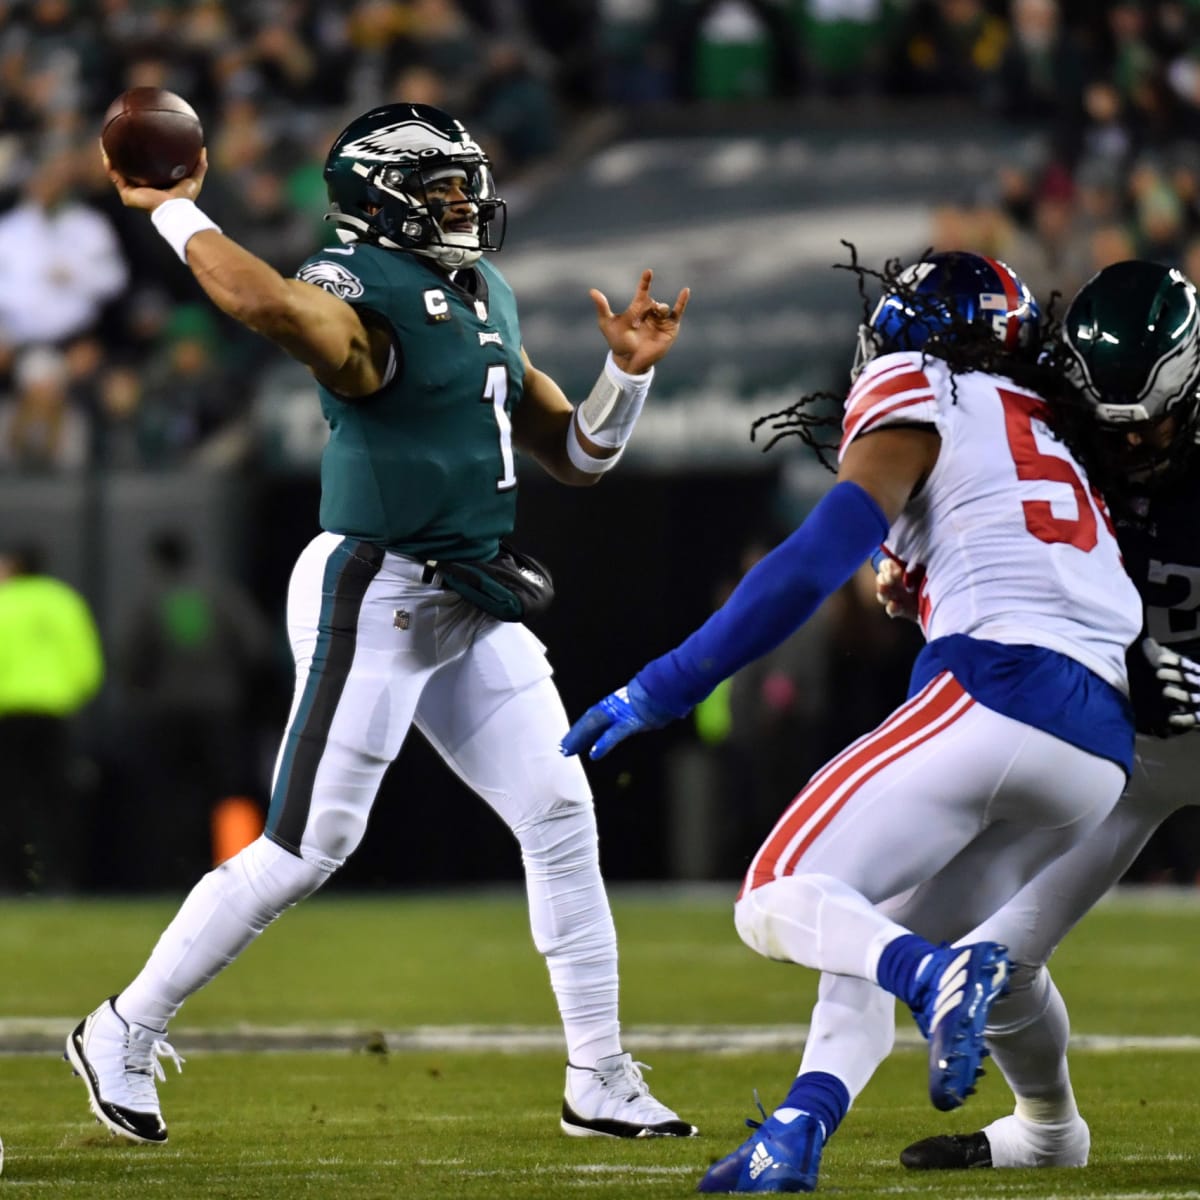 NFL analyst and ex-Giants Super Bowl champion says Jalen Hurts 'absolutely'  is capable of leading the Eagles 